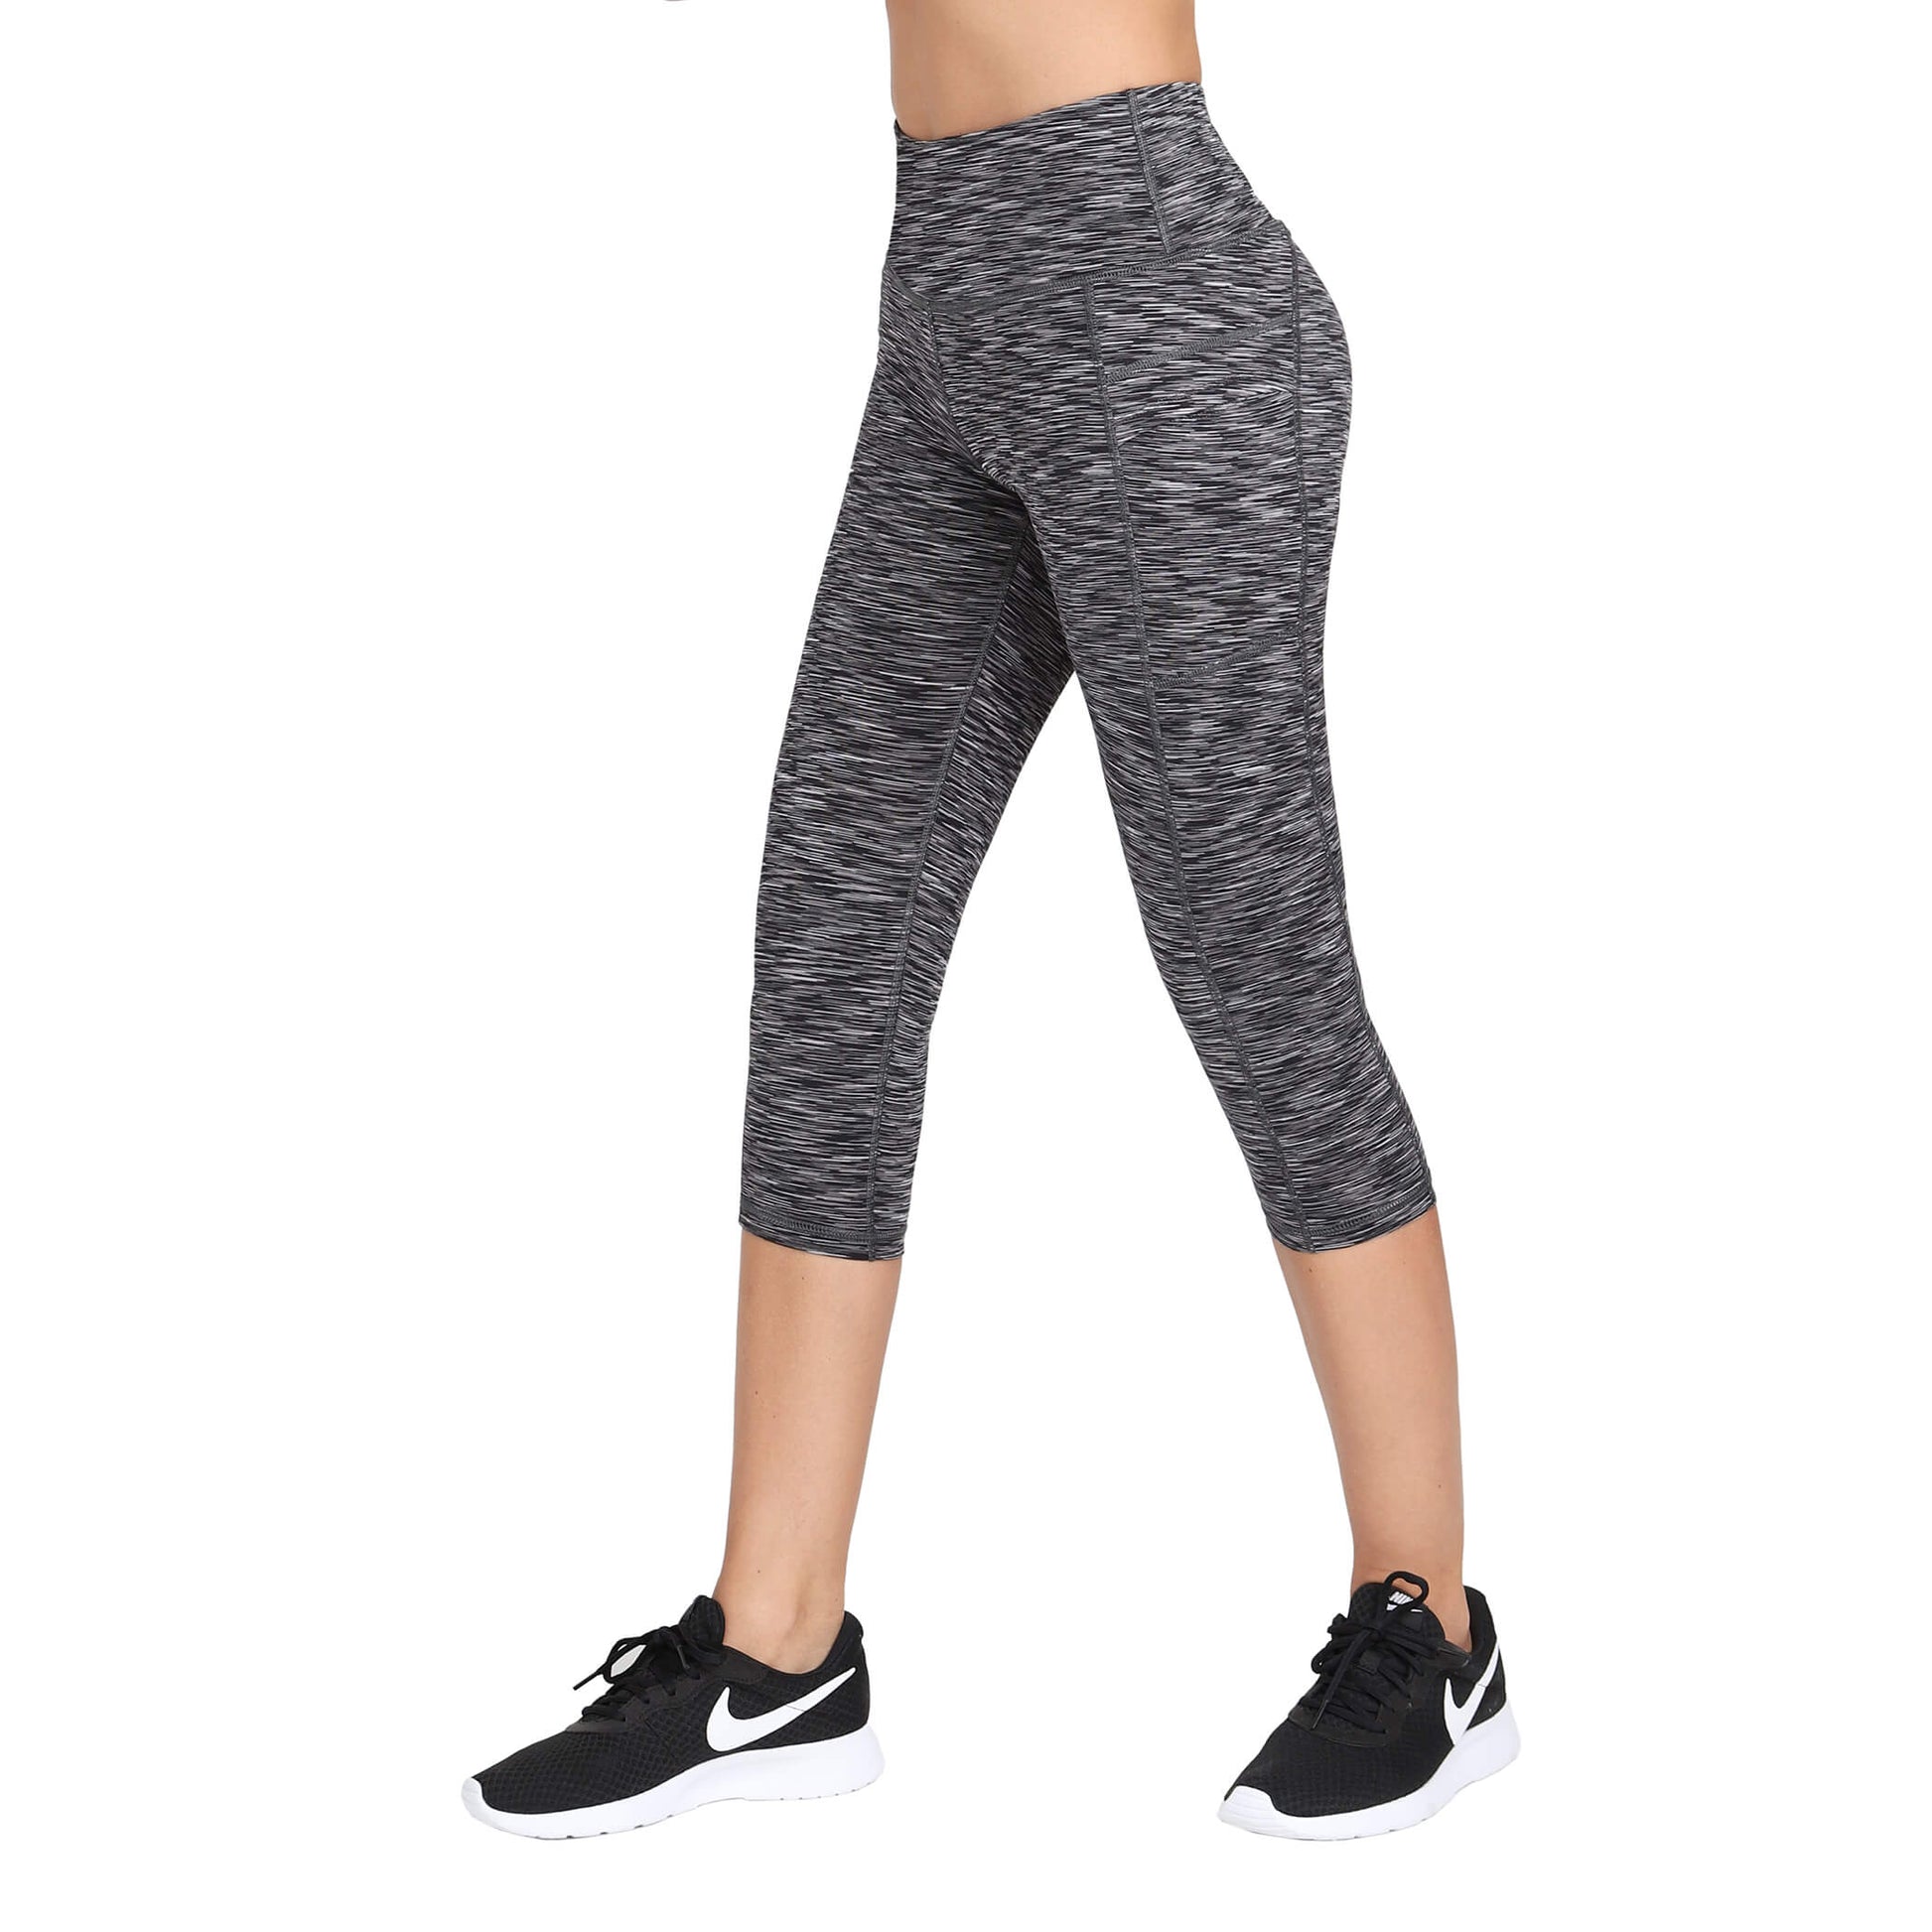 LifeSky Yoga Pants with Pockets for Women, High Waisted Tummy